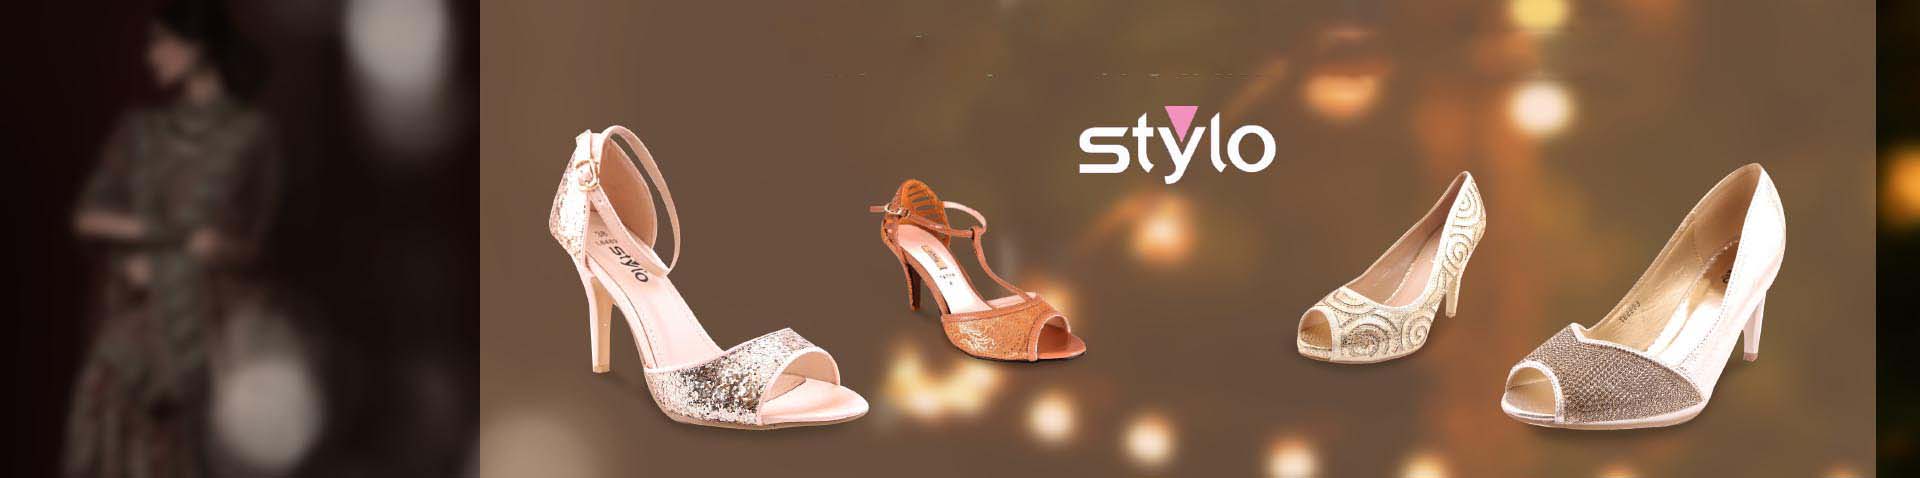 Stylo Shoes Wedding Footwear Collection For Women 2016-2017